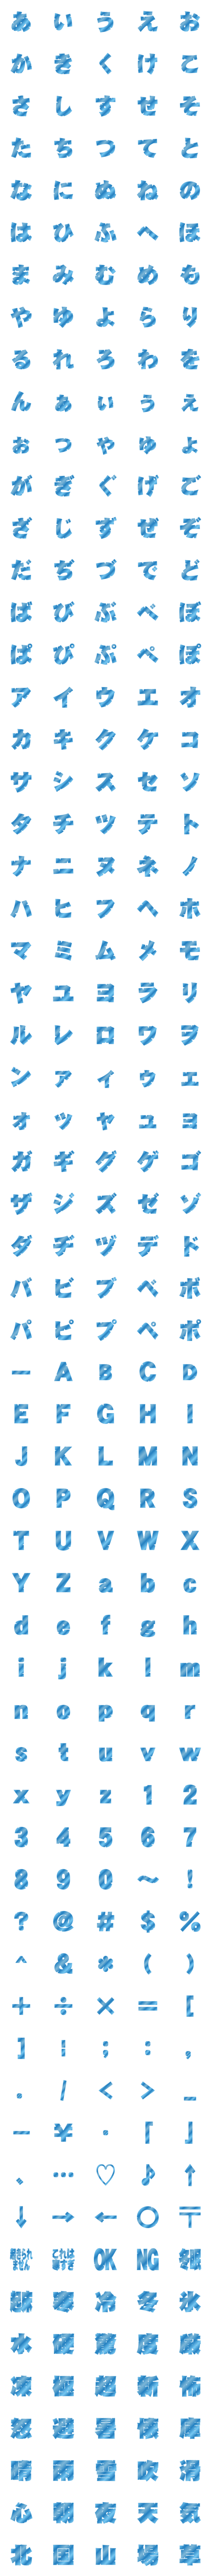 [LINE絵文字]DFひびゴシック体 フォント絵文字の画像一覧